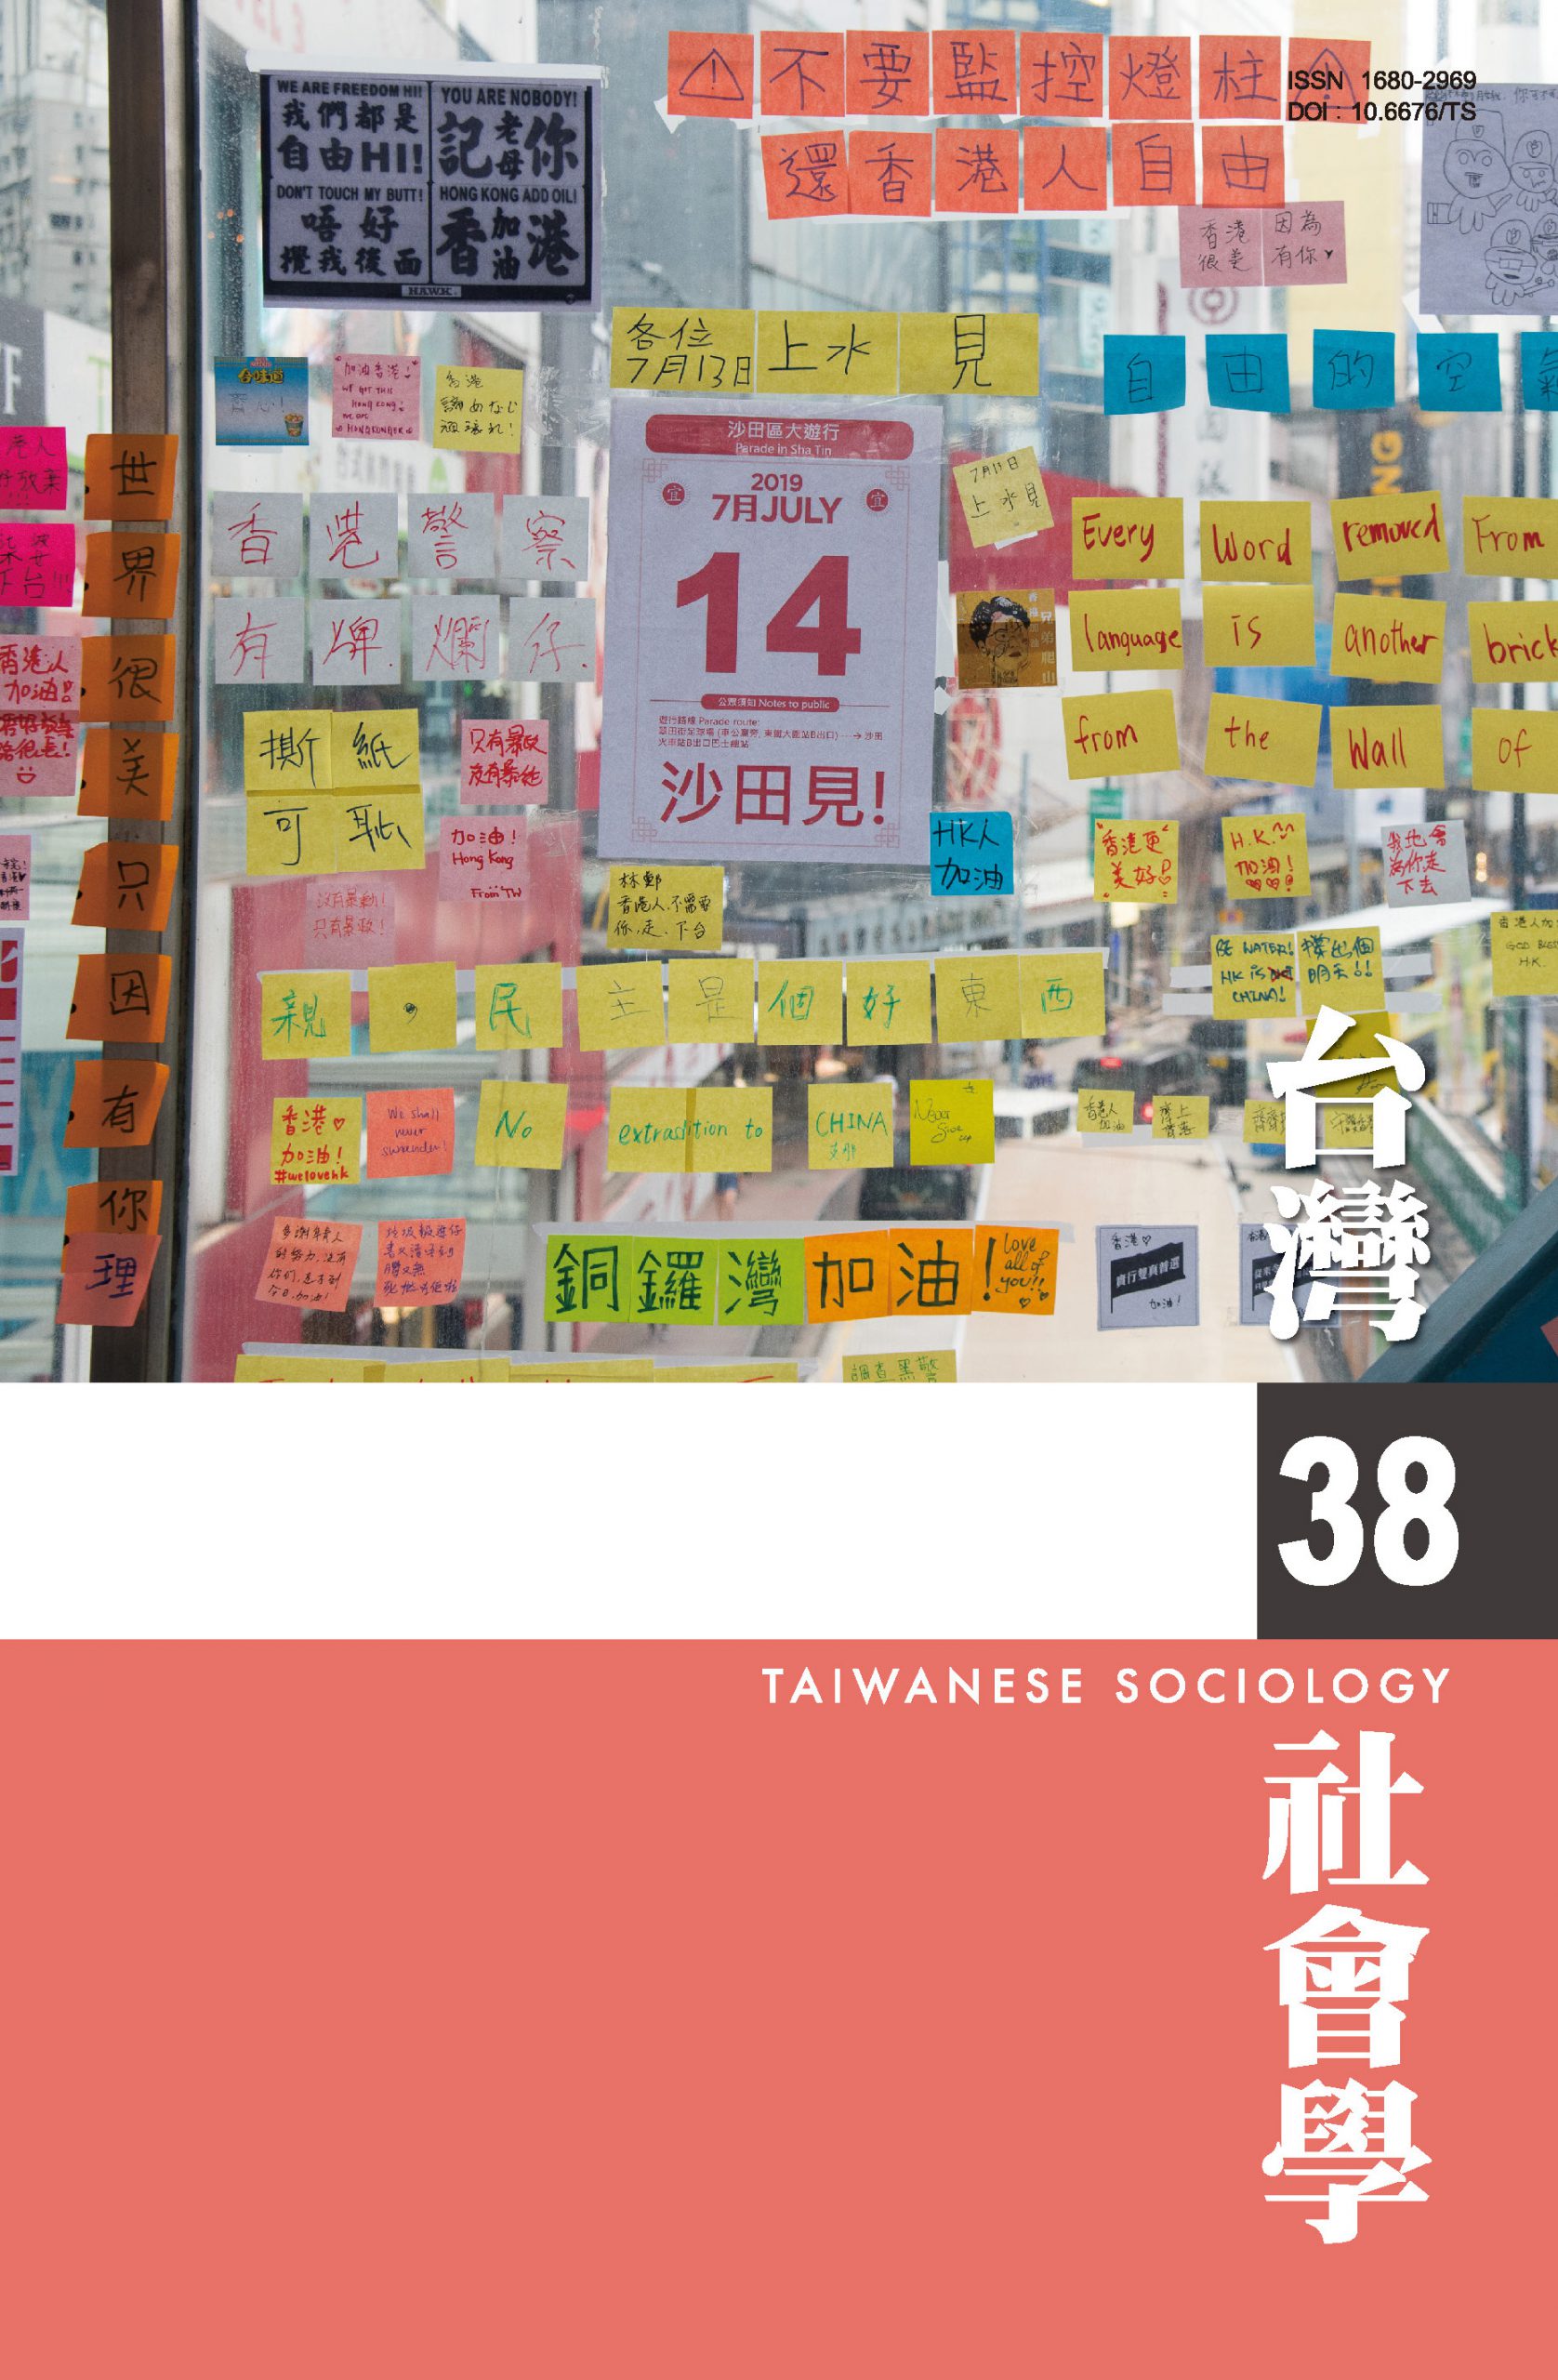 Taiwanese Sociology, No. 38 (December 2019) is now available